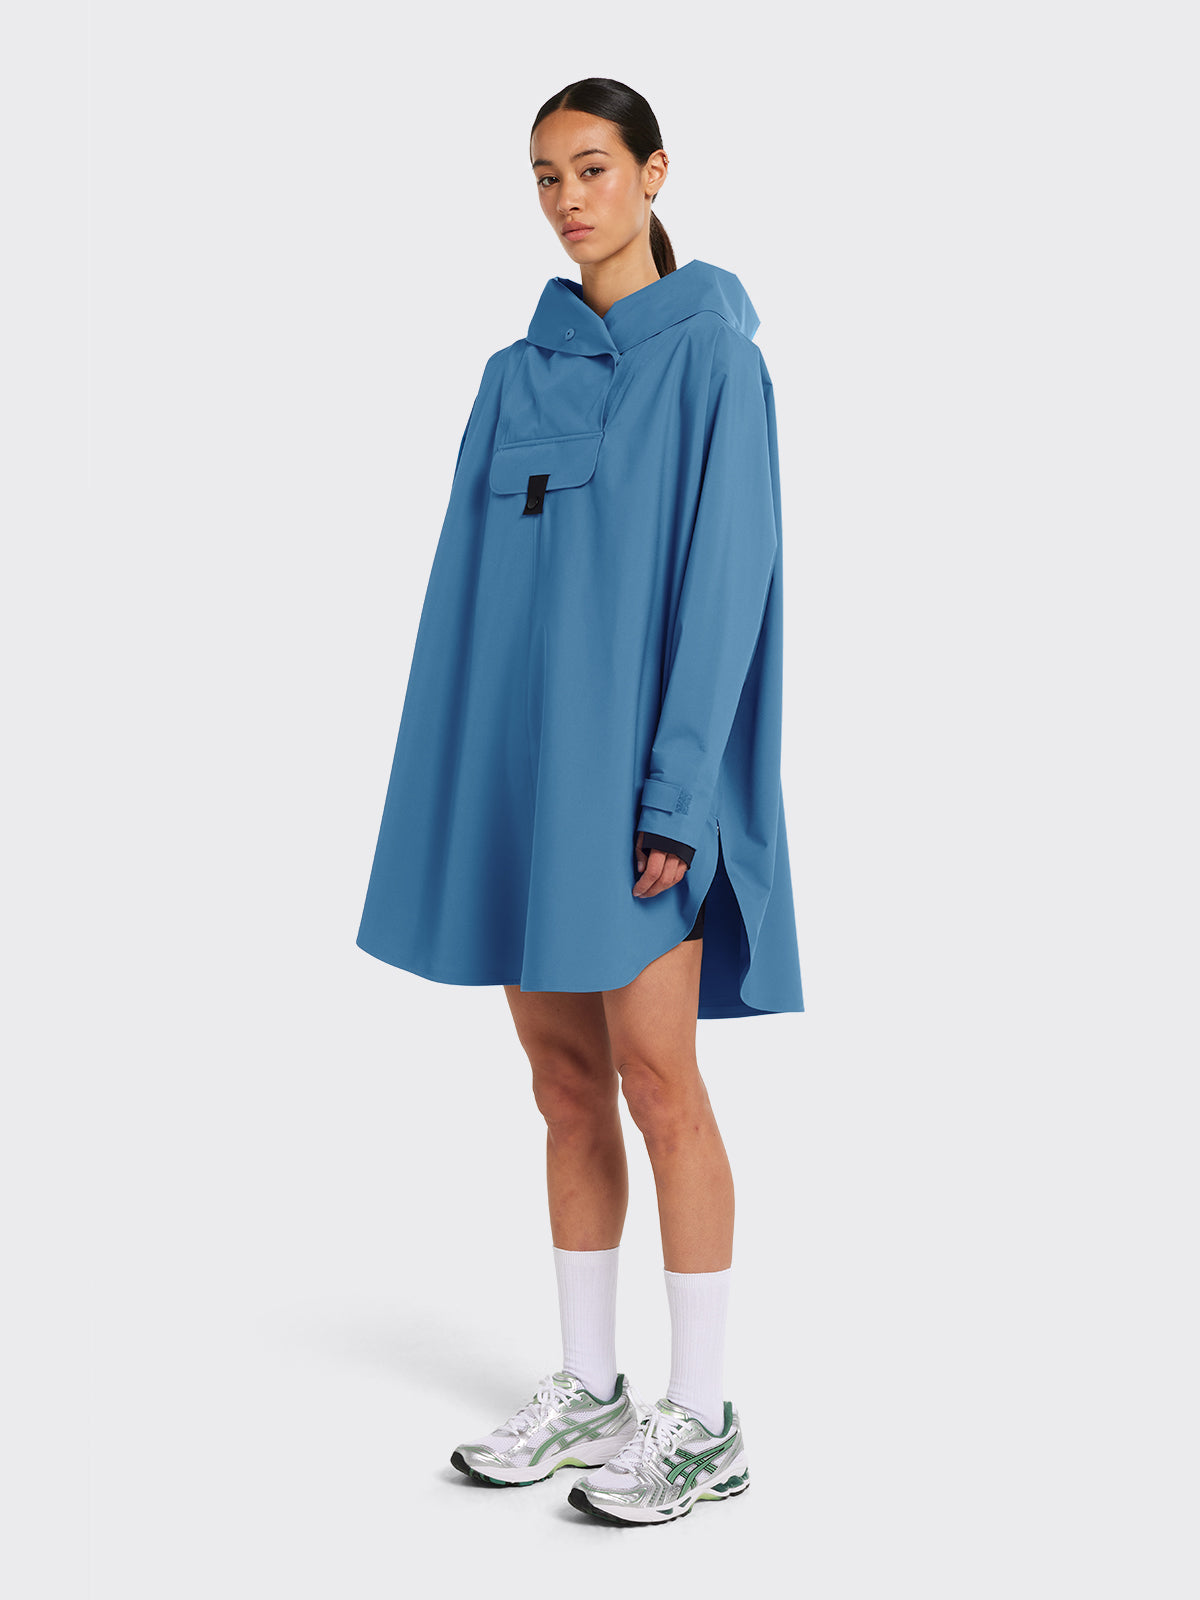 Model wearing Bergen poncho from Blæst in the color Coronet Blue